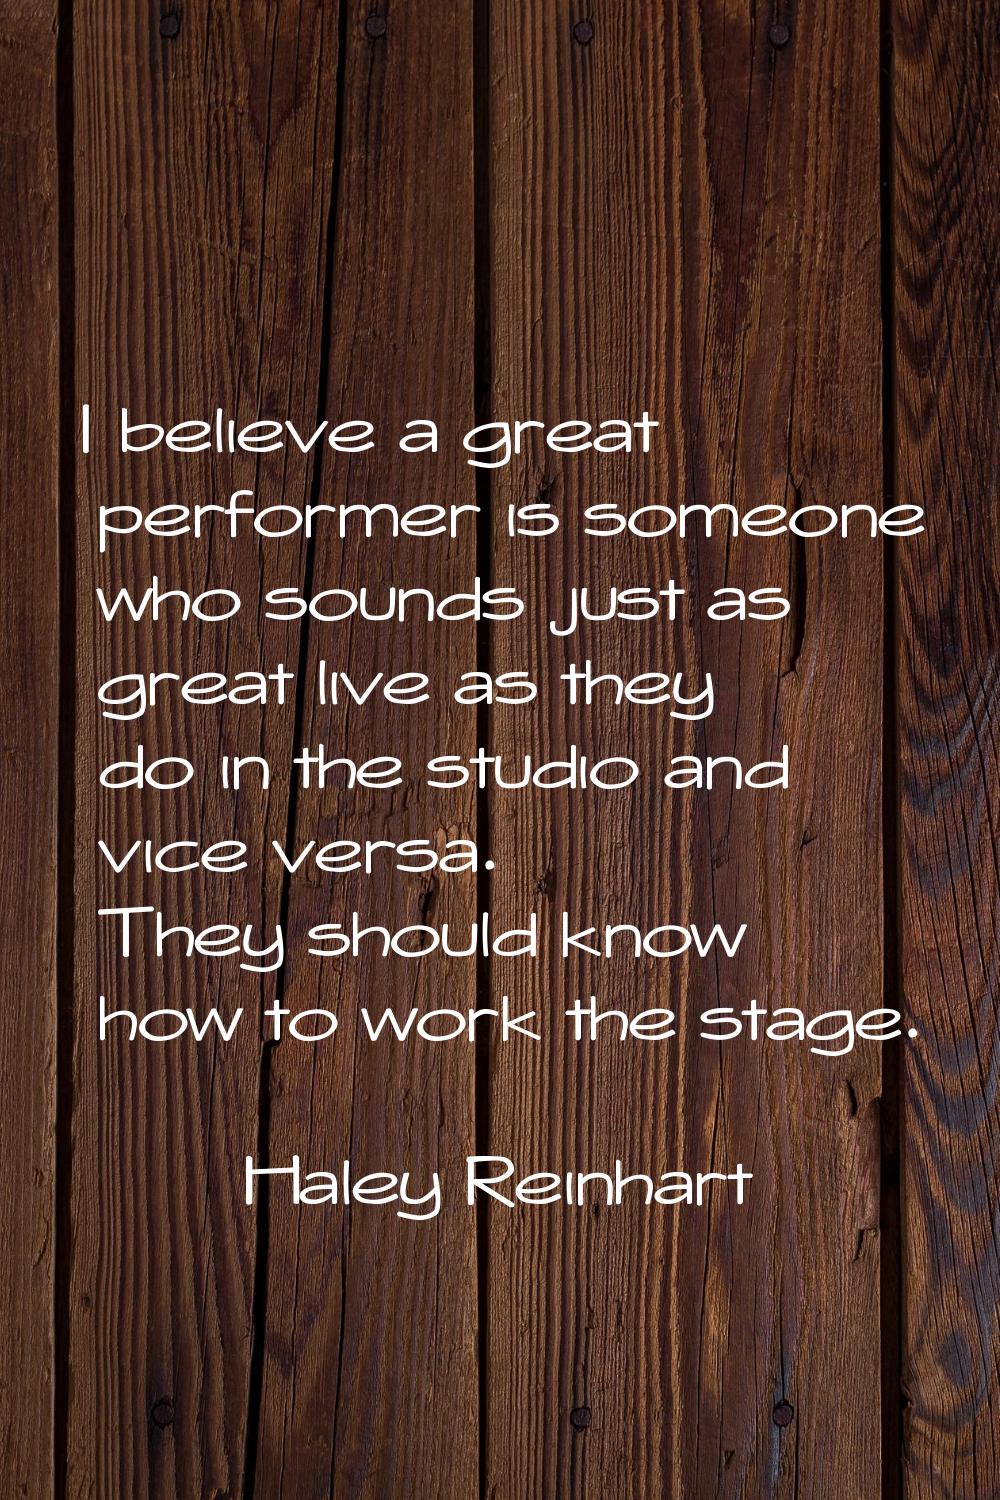 I believe a great performer is someone who sounds just as great live as they do in the studio and v